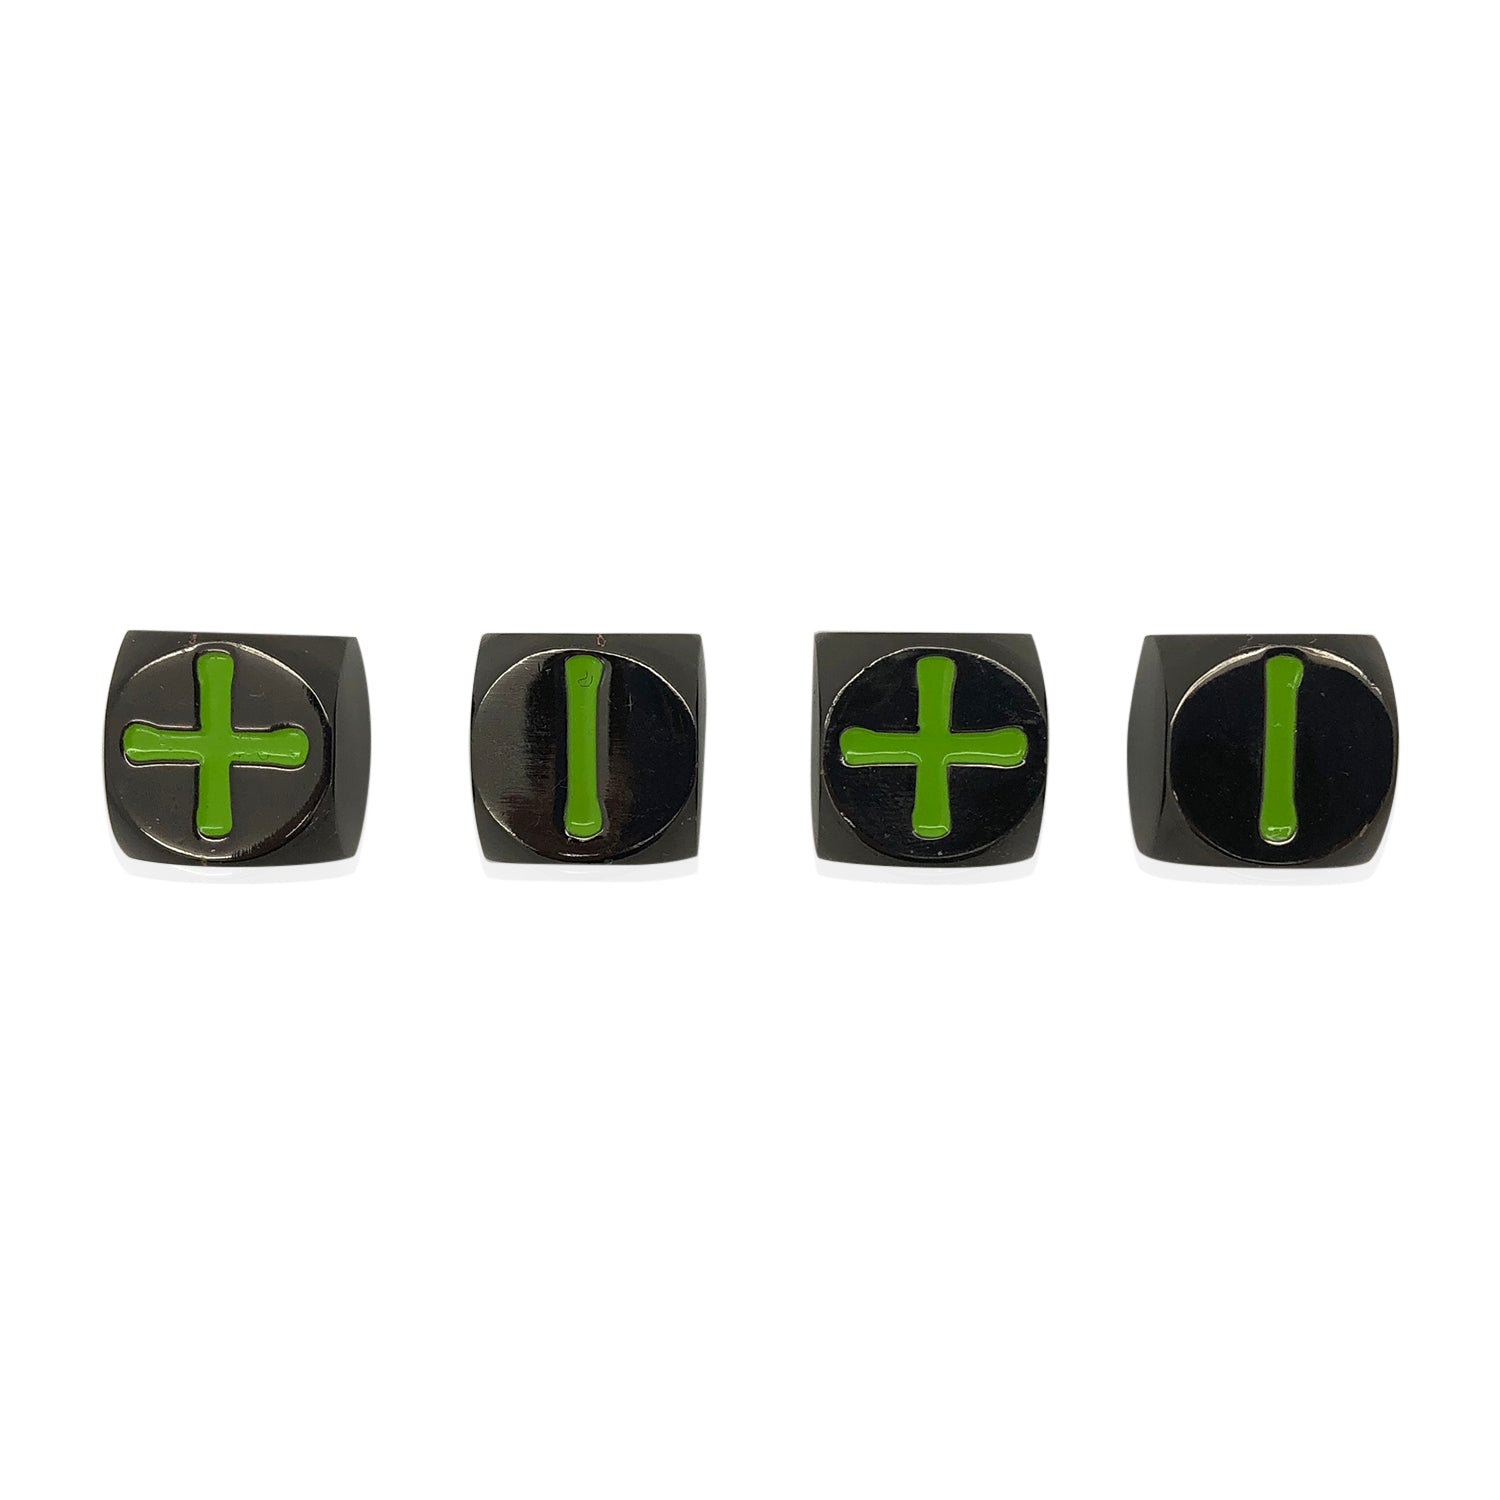 Fate Dice – Poisoned Daggers Pack of 4 Metal Dice